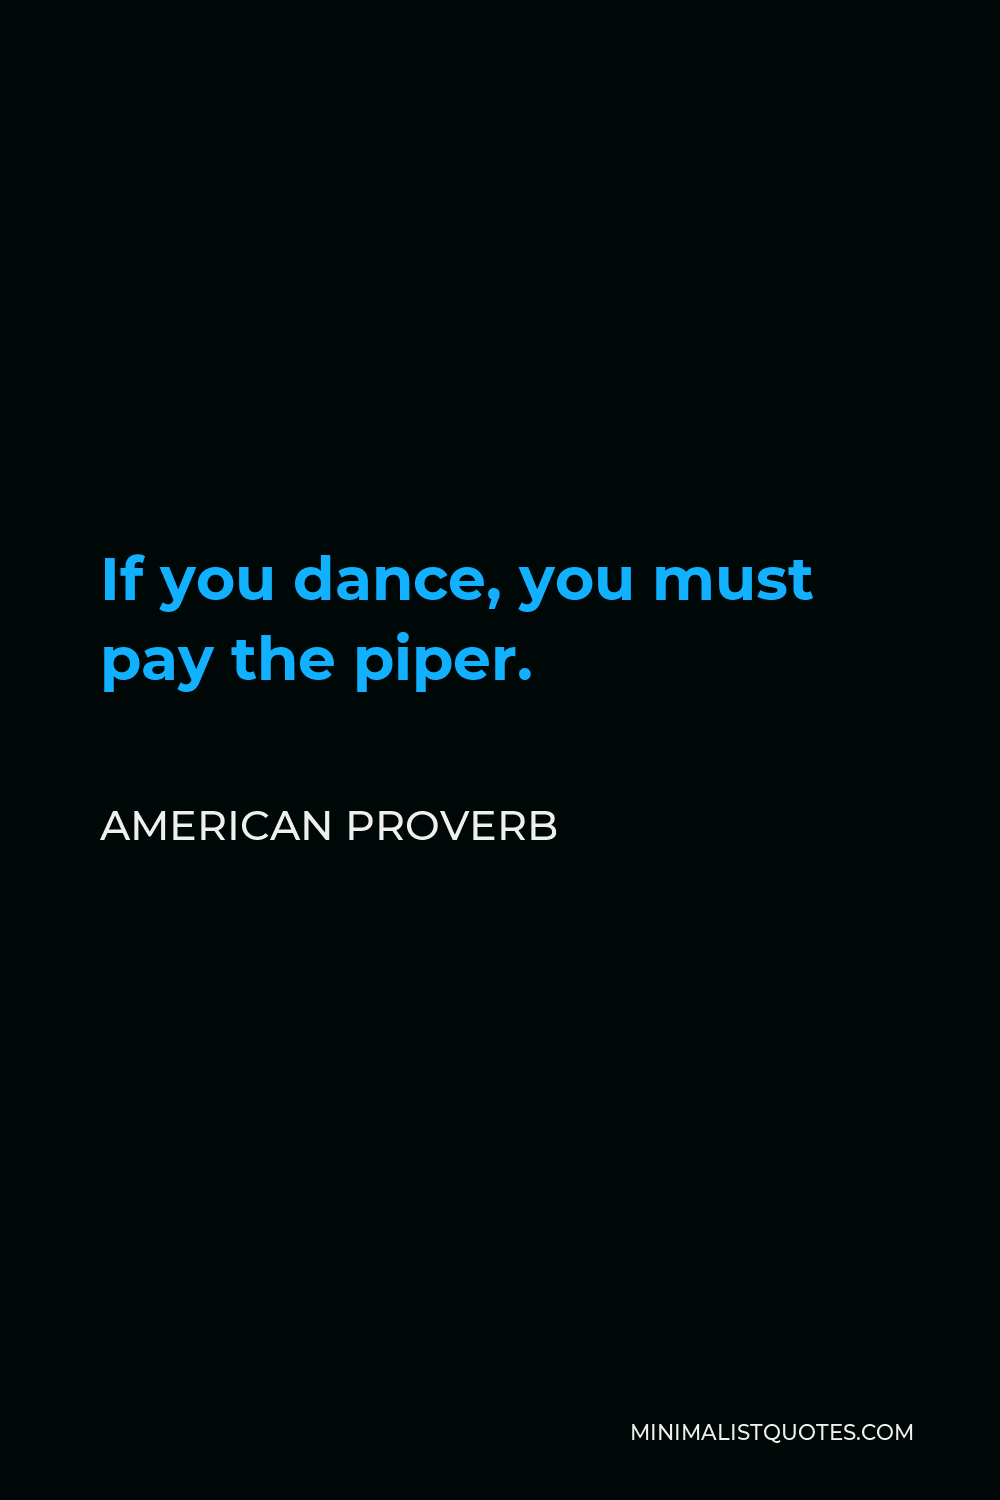 American Proverb Quote - If you dance, you must pay the piper.